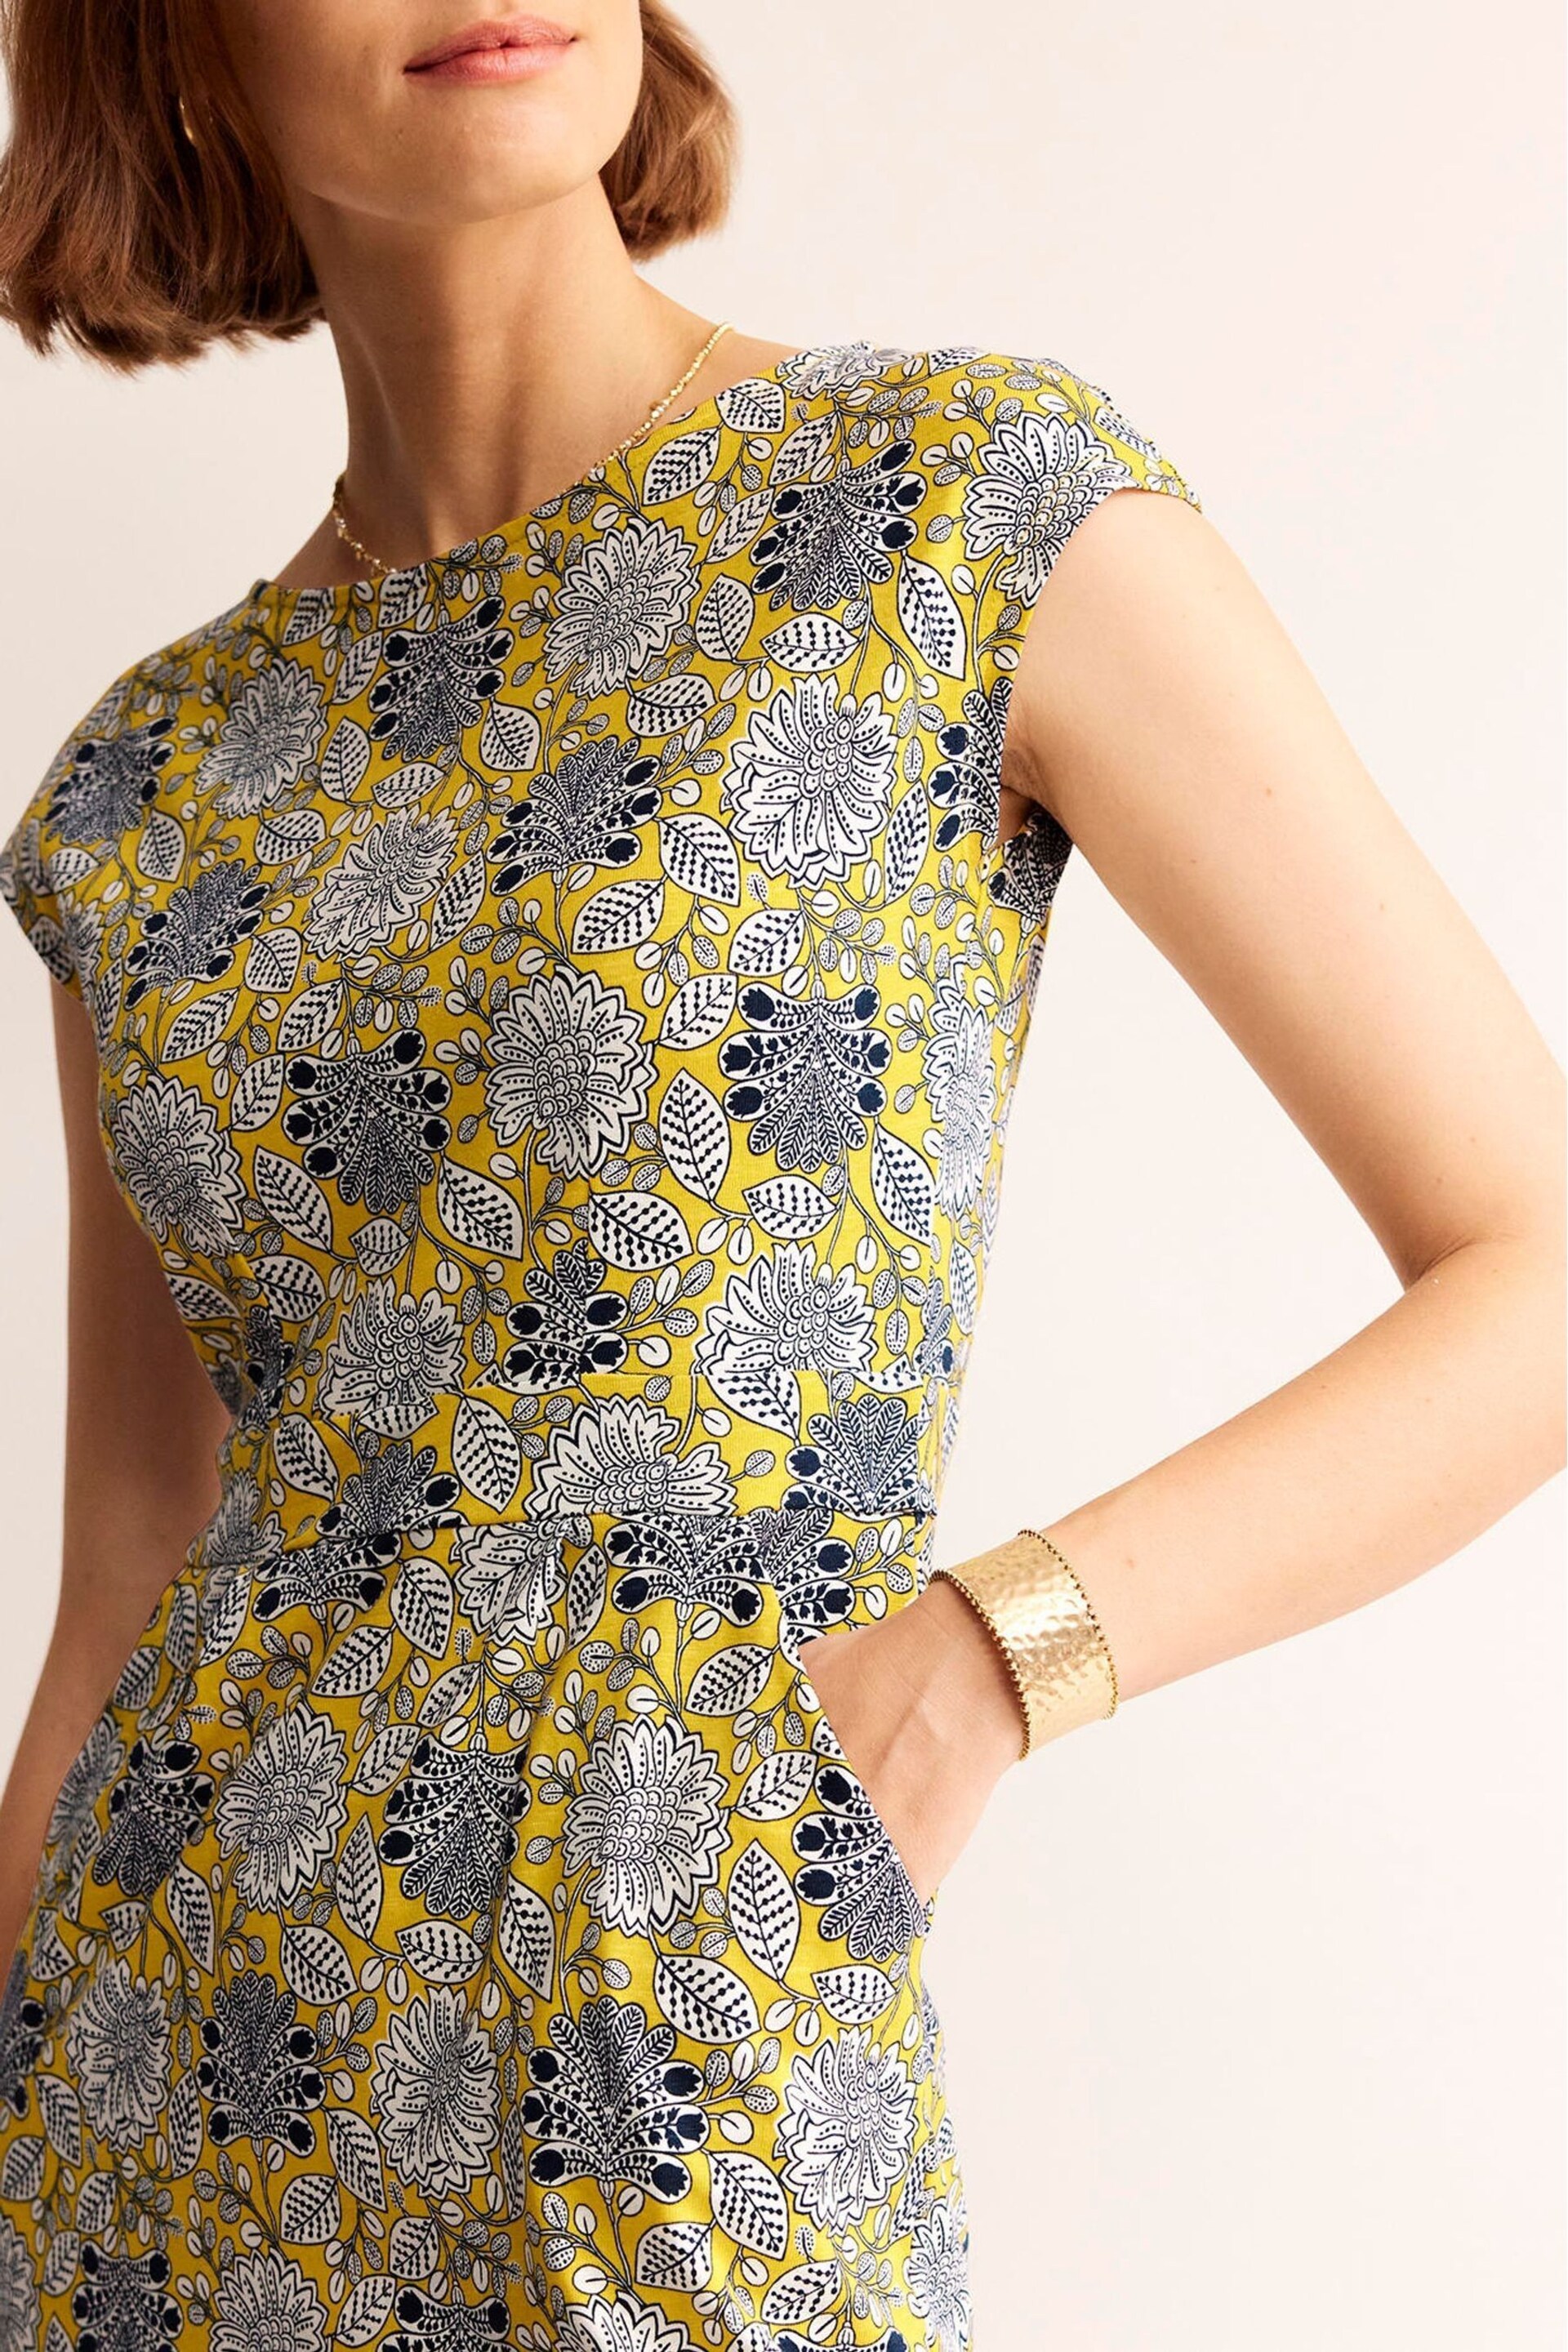 Boden Yellow Florrie Jersey Dress - Image 2 of 6